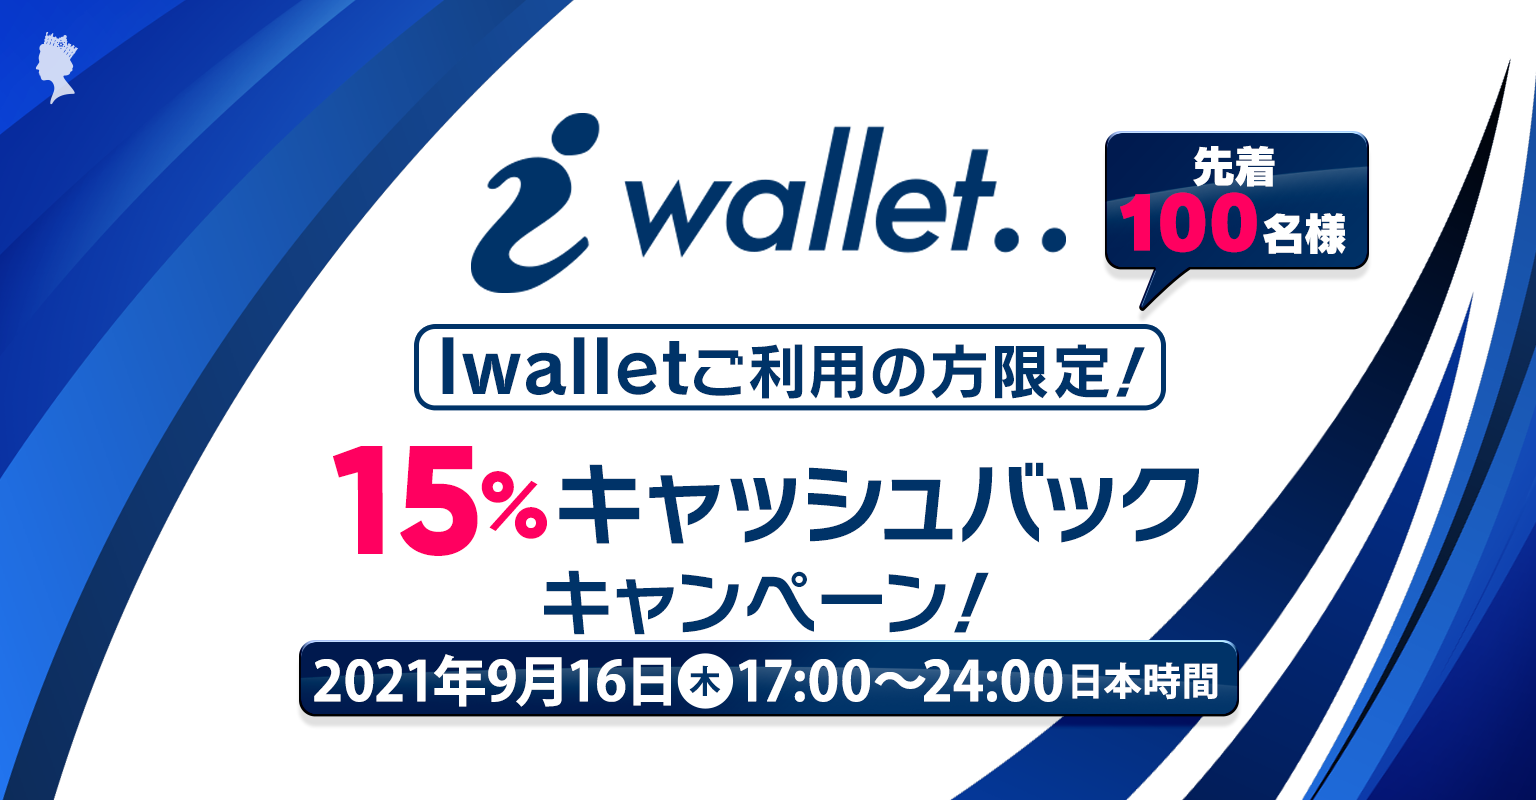 iWallet Deposit Bonus Campaign gives up to a 15% deposit bonus from September 16-17, 2021. Let's check what you need to know to join this campaign,